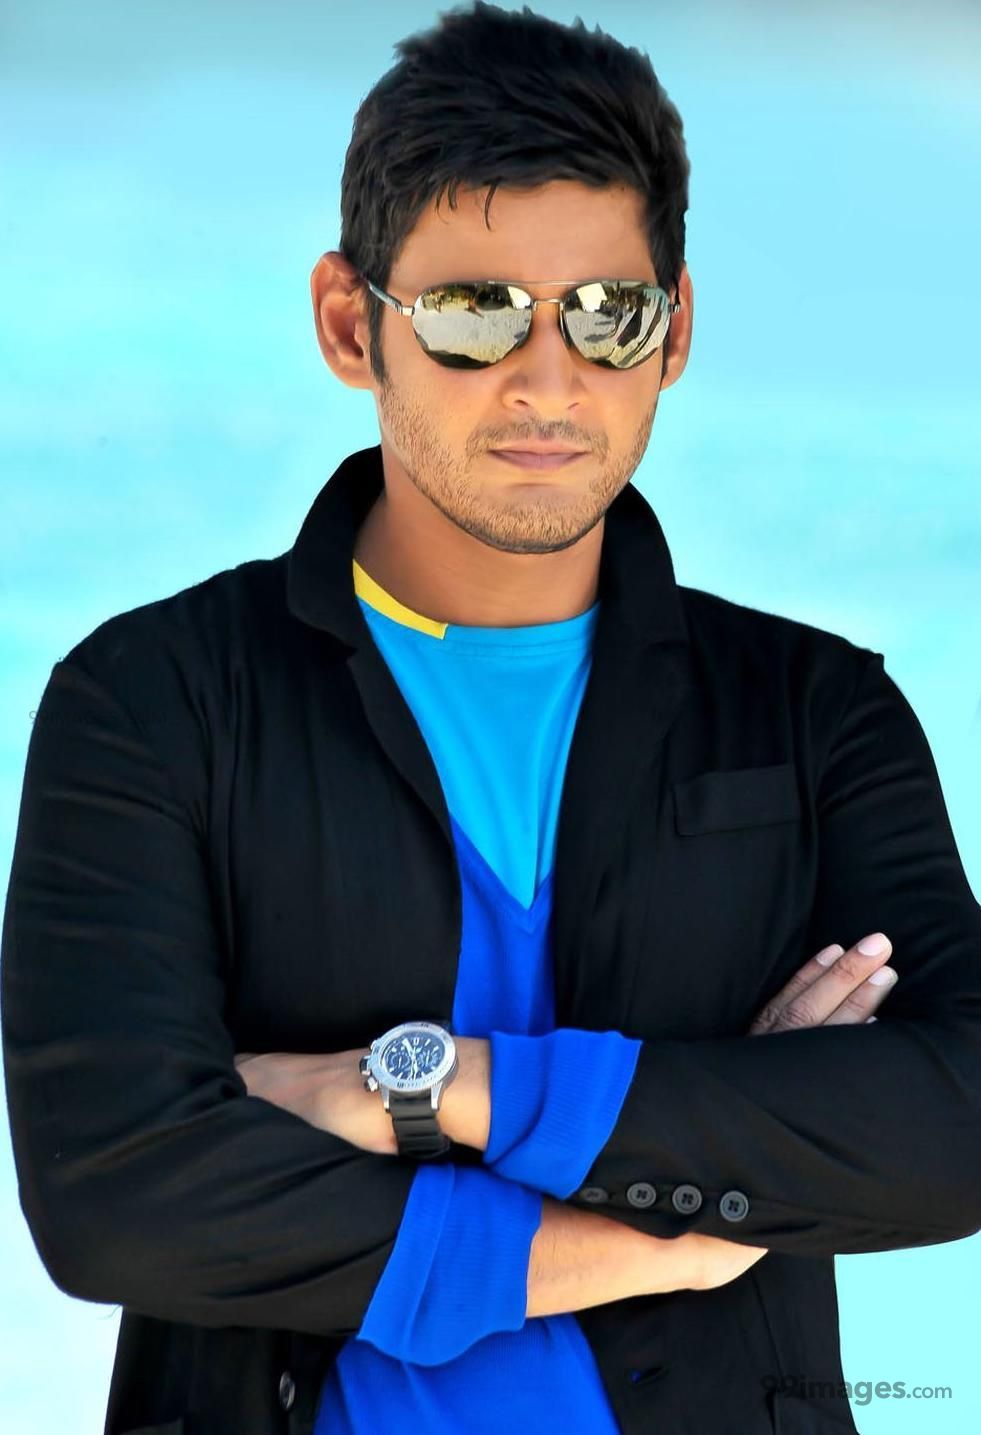 Mahesh Babu Hd Photos Wallpapers Whatsapp Dp 302951 2596976 Hd Wallpaper Backgrounds Download He is the younger brother of actor turned producer ramesh babu ghattamaneni. mahesh babu hd photos wallpapers